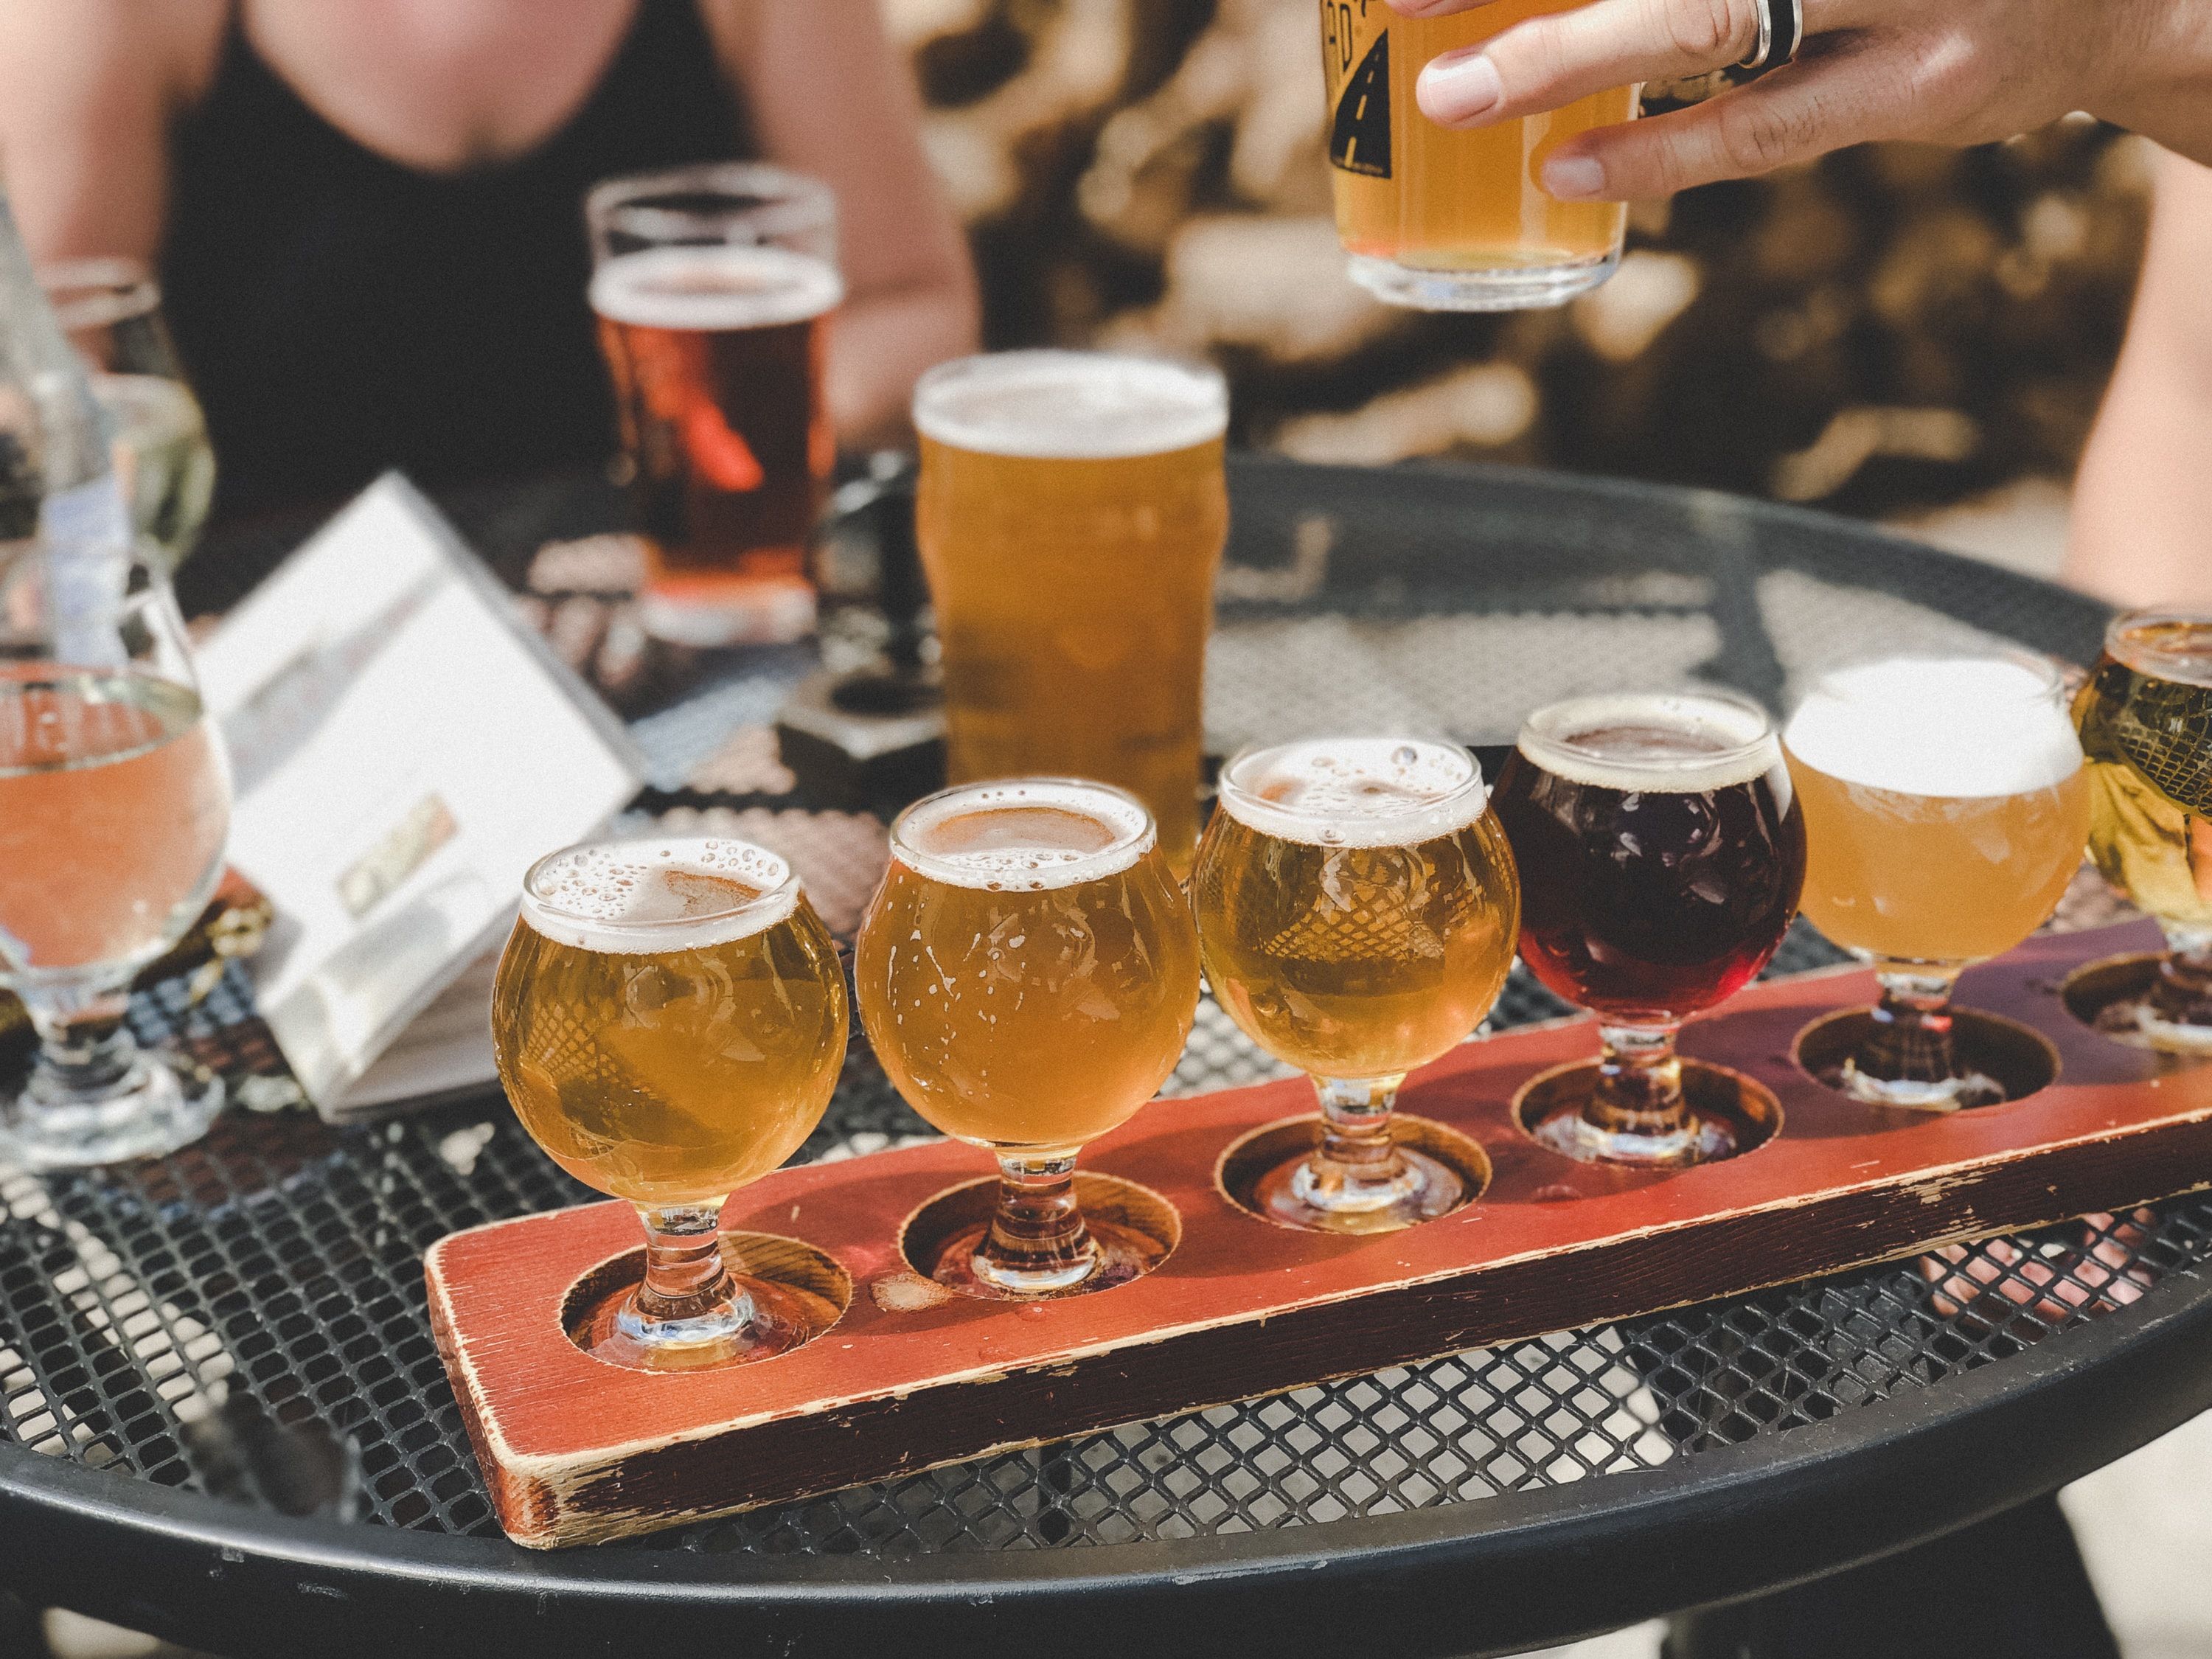 Finger Lakes Beer Trail - Discover over 80 unique microbreweries and brewpubs over a 210-mile stretch